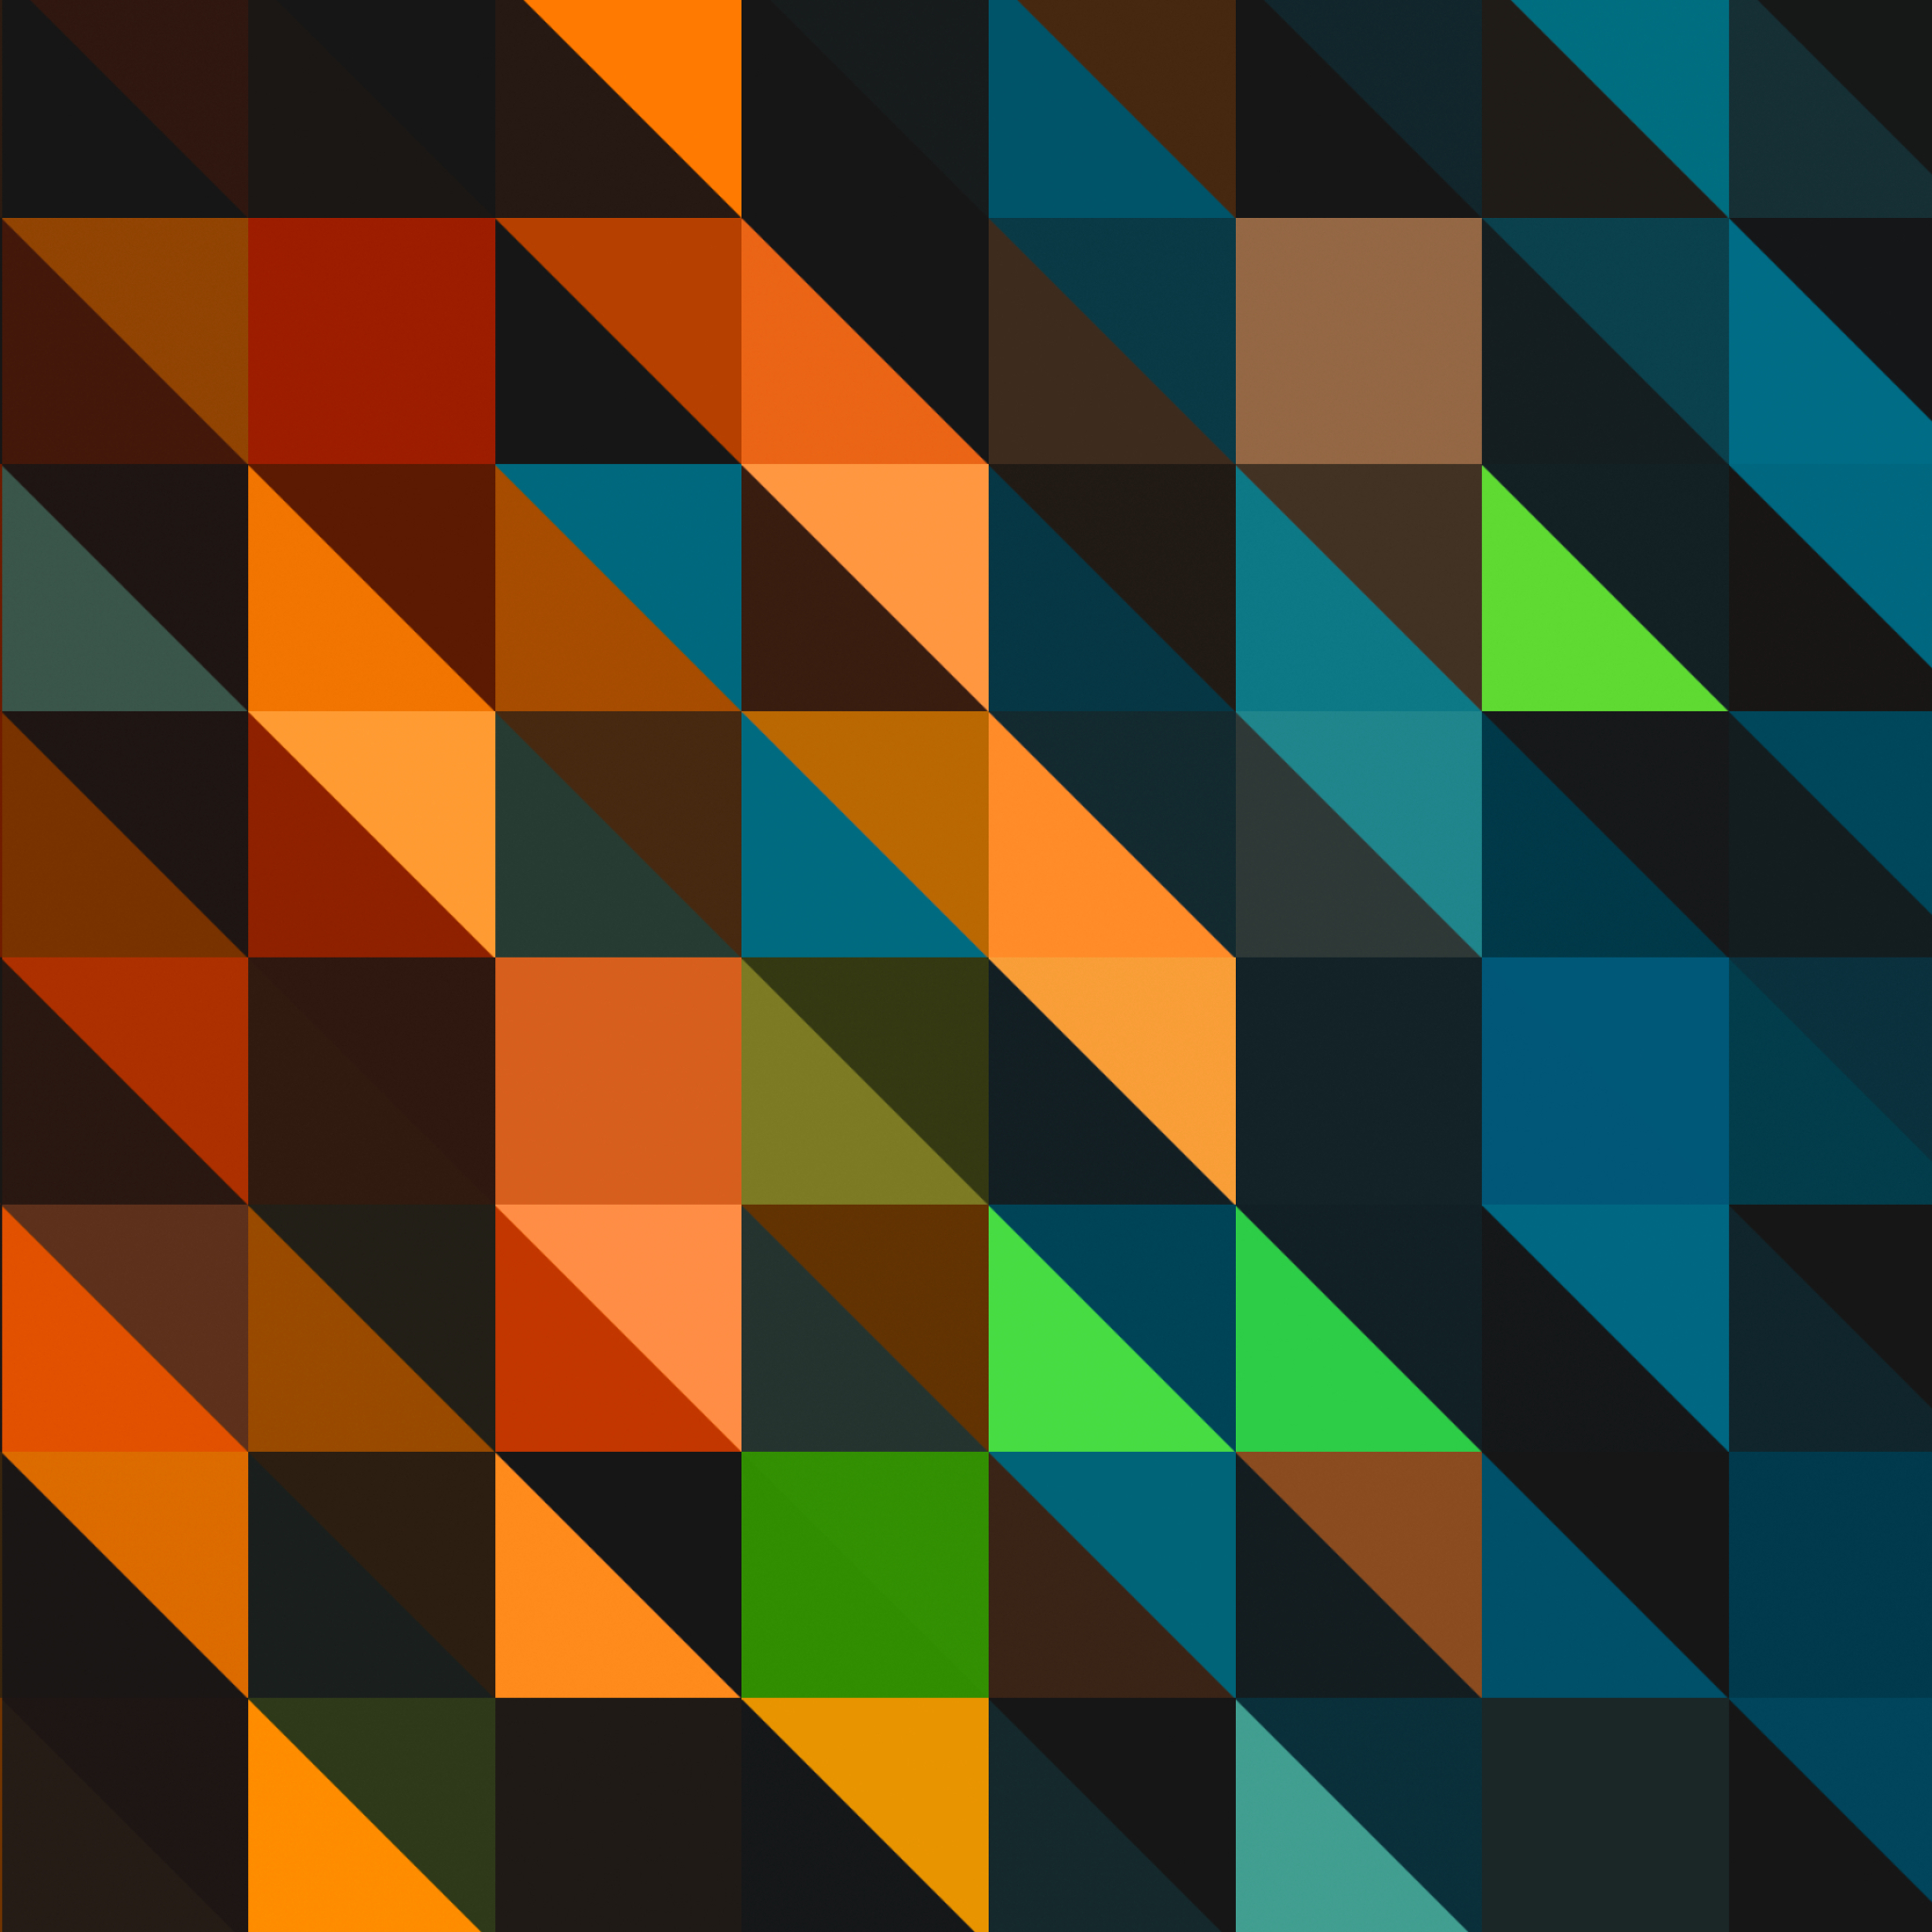 2048x2048 Resolution Triangle Colorful Pattern Ipad Air Wallpaper